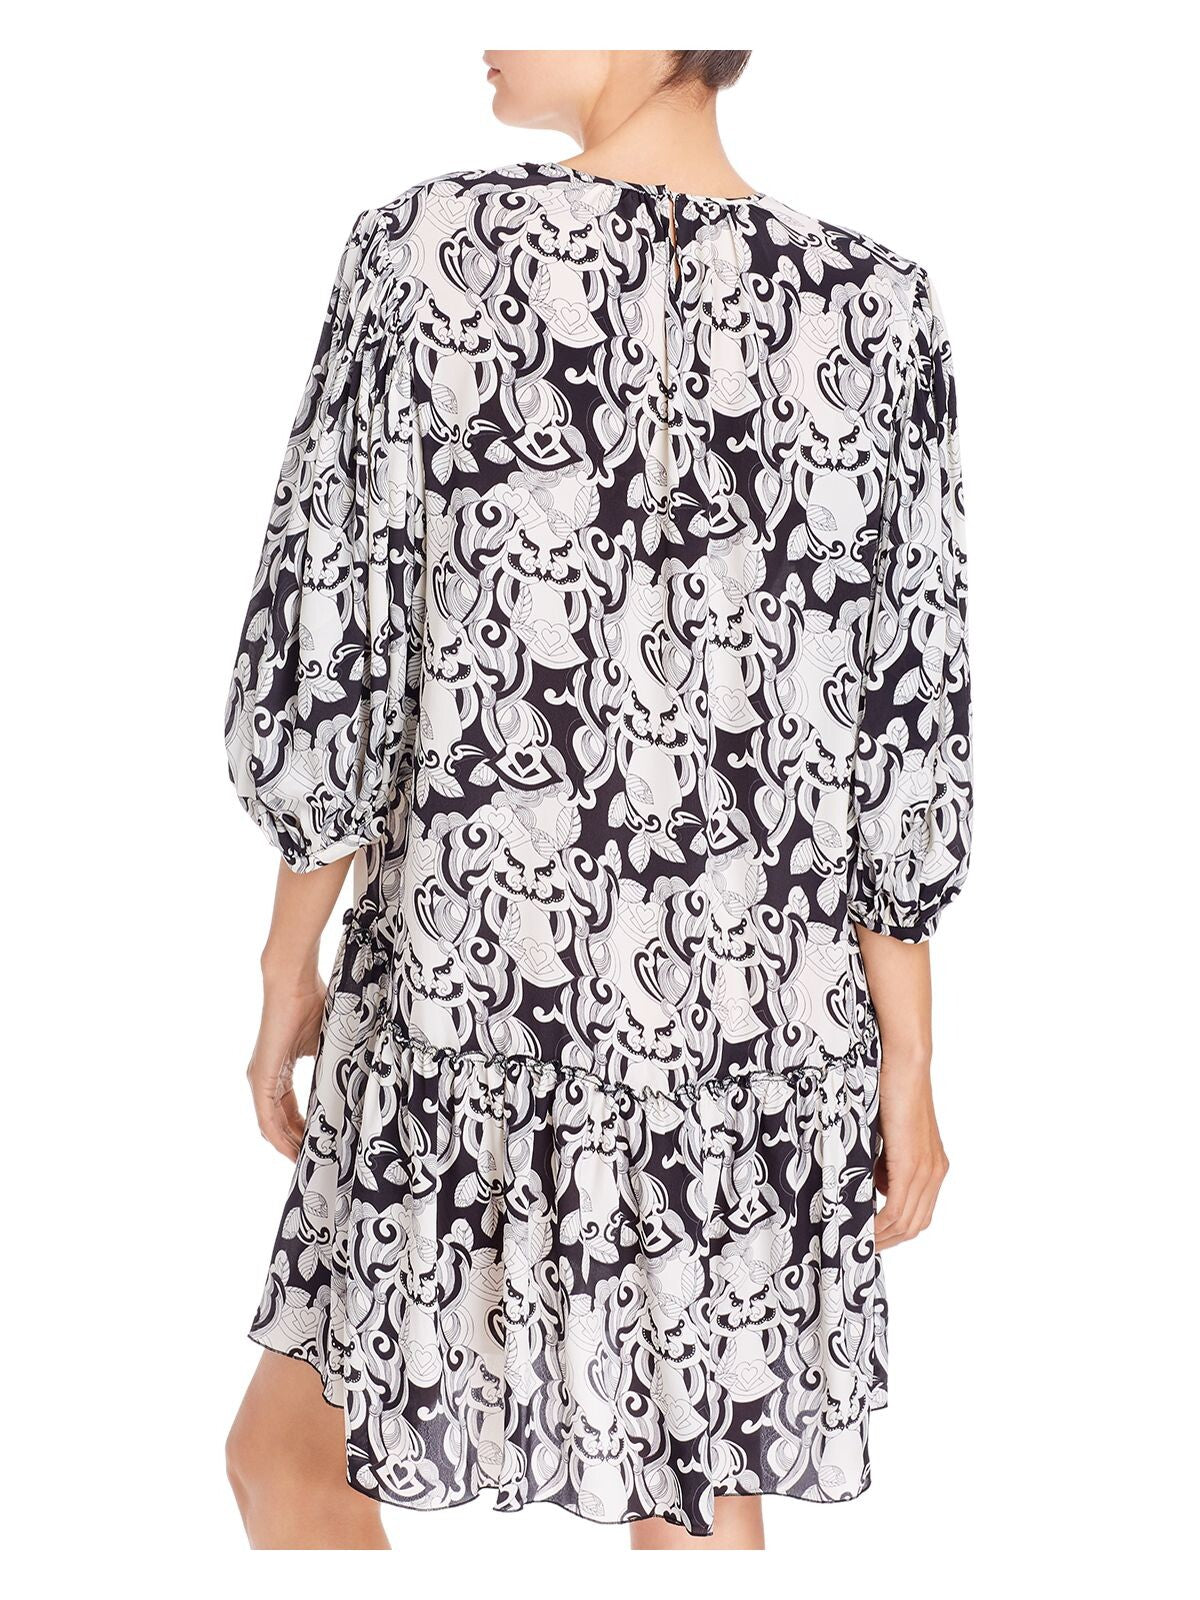 SEE BY CHLOE Womens Black Ruffled Gathered Keyhole Closure Unlined Pullover Printed Balloon Sleeve Round Neck Above The Knee Shift Dress 34